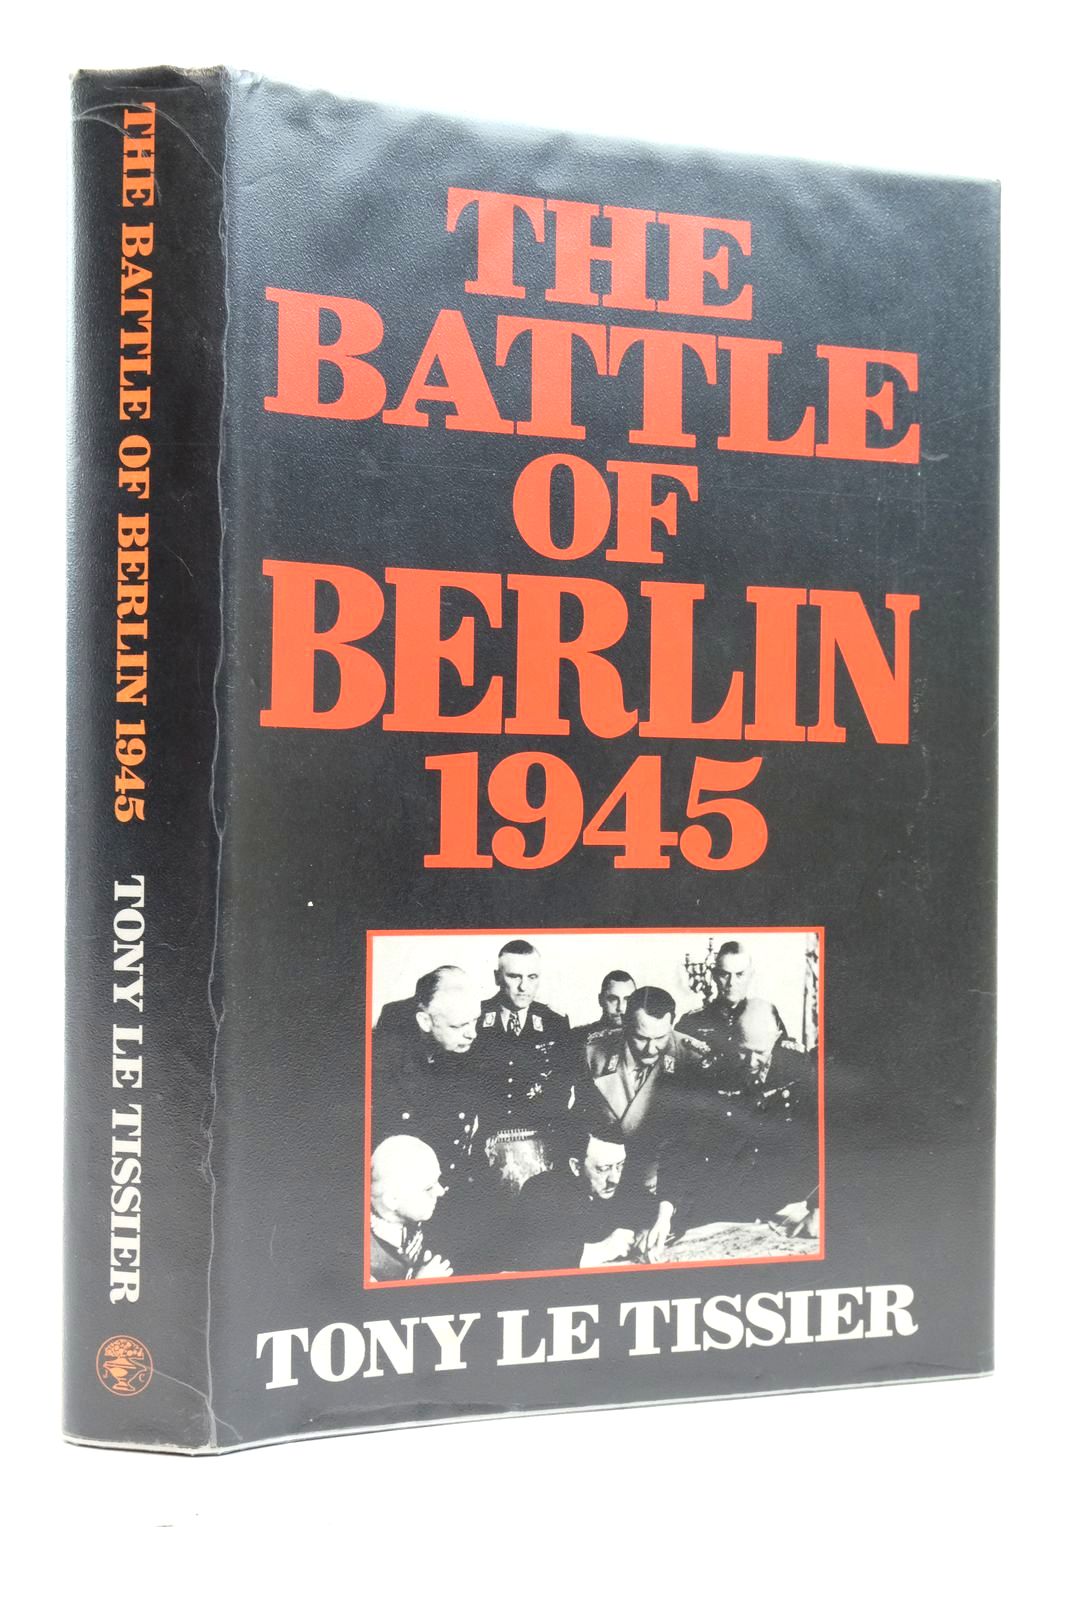 Photo of THE BATTLE OF BERLIN 1945 written by Le Tissier, Tony published by Jonathan Cape (STOCK CODE: 2138048)  for sale by Stella & Rose's Books